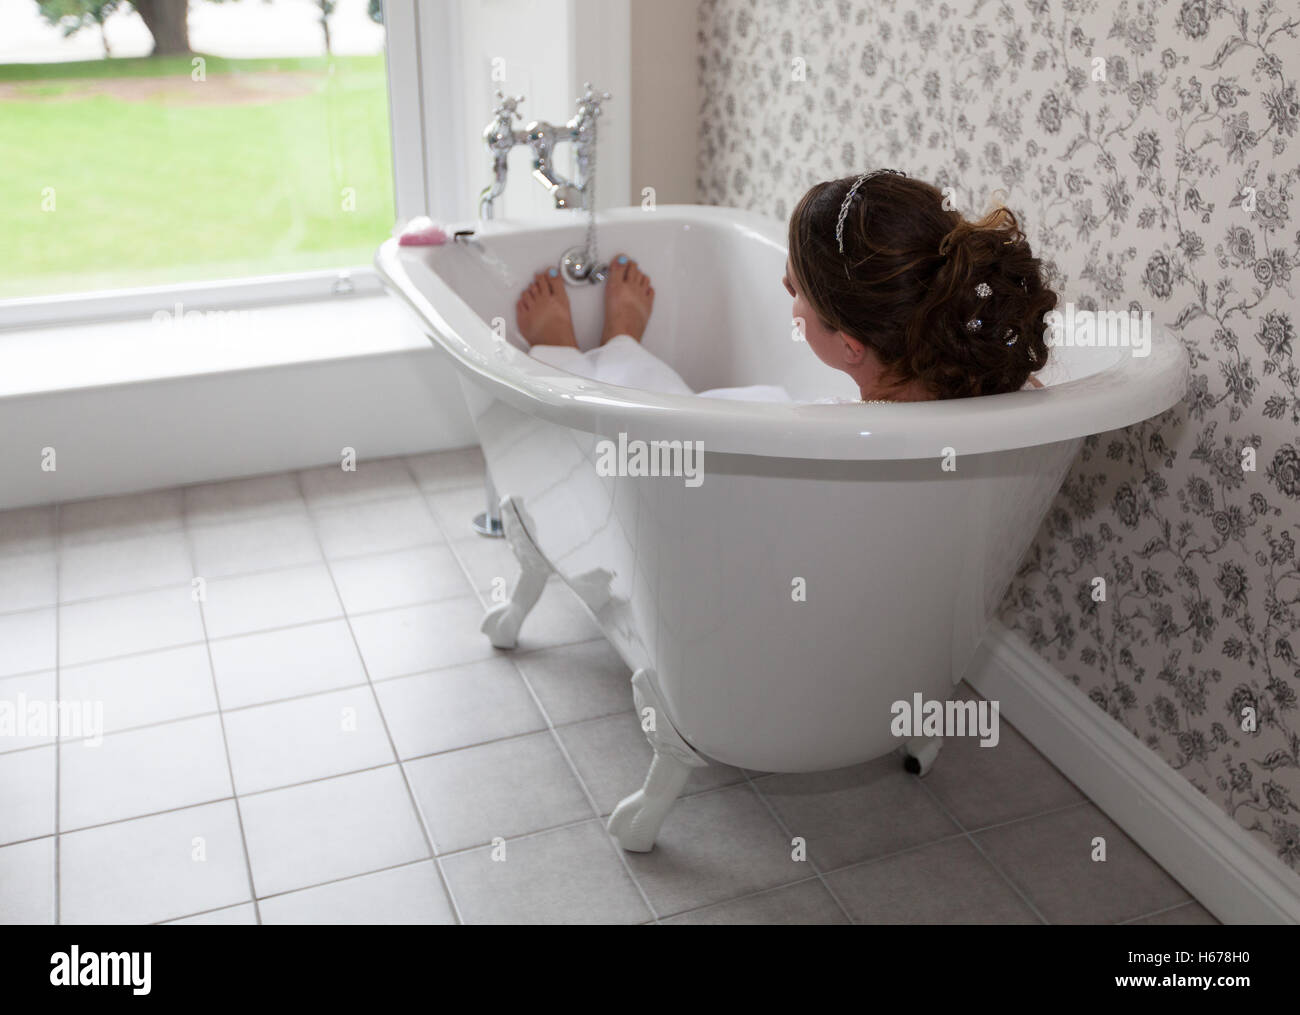 Bride laid in the bath on her wedding day, taking a moment to herself. Stock Photo